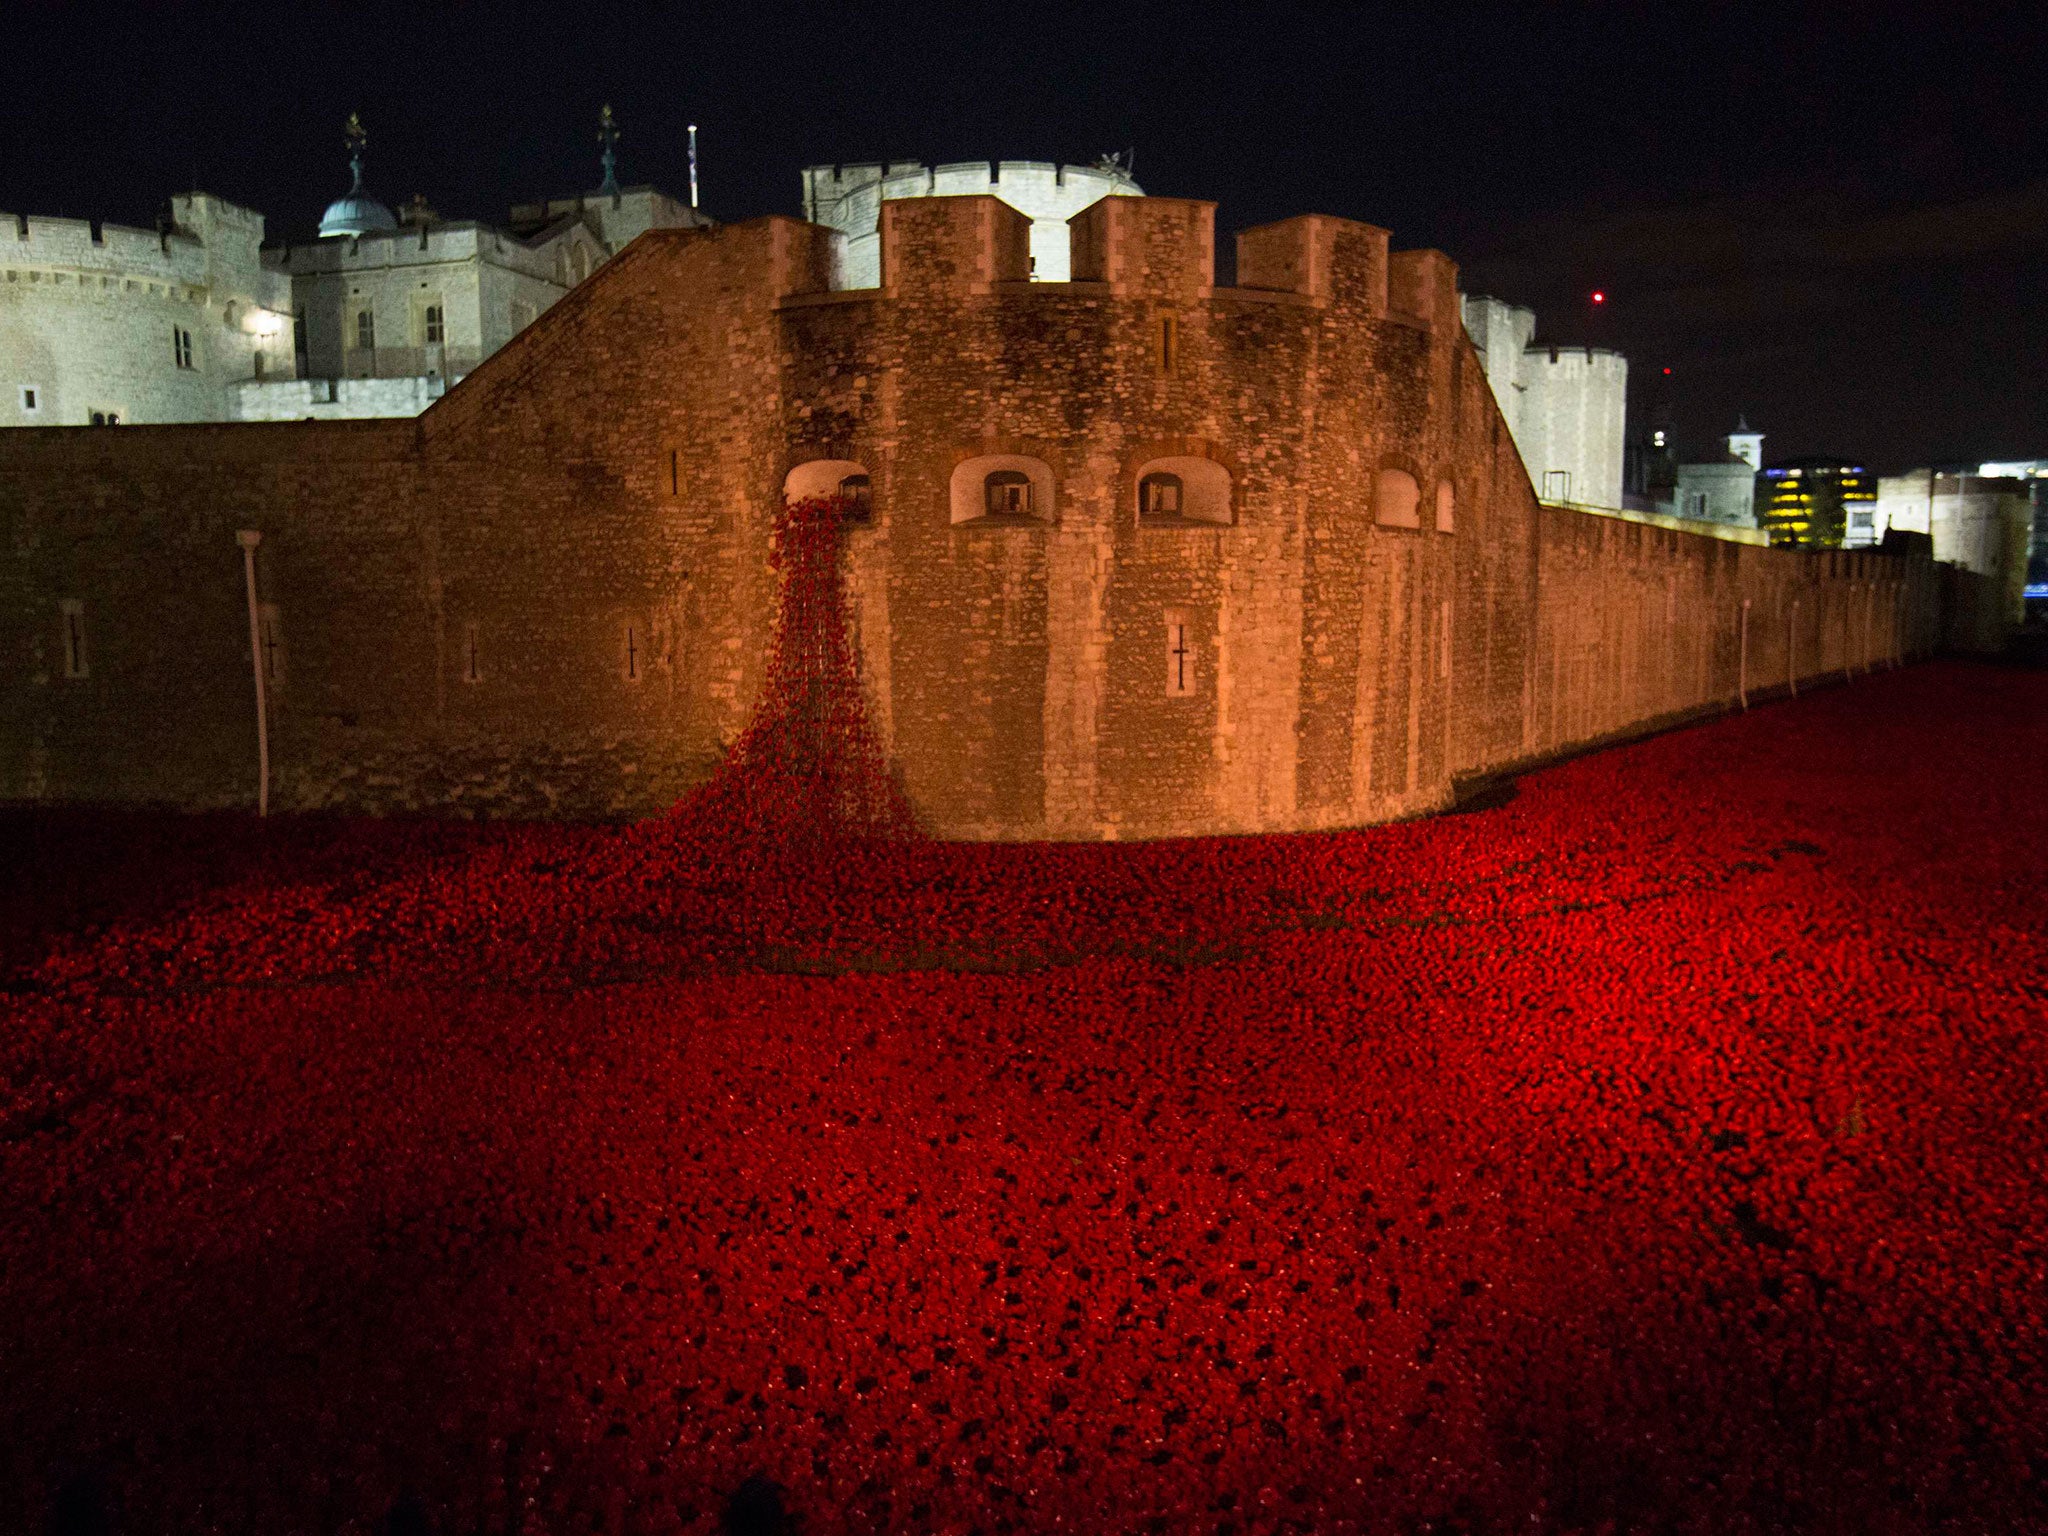 The "Blood Swept Lands and Seas of Red" art installation at the Tower of London